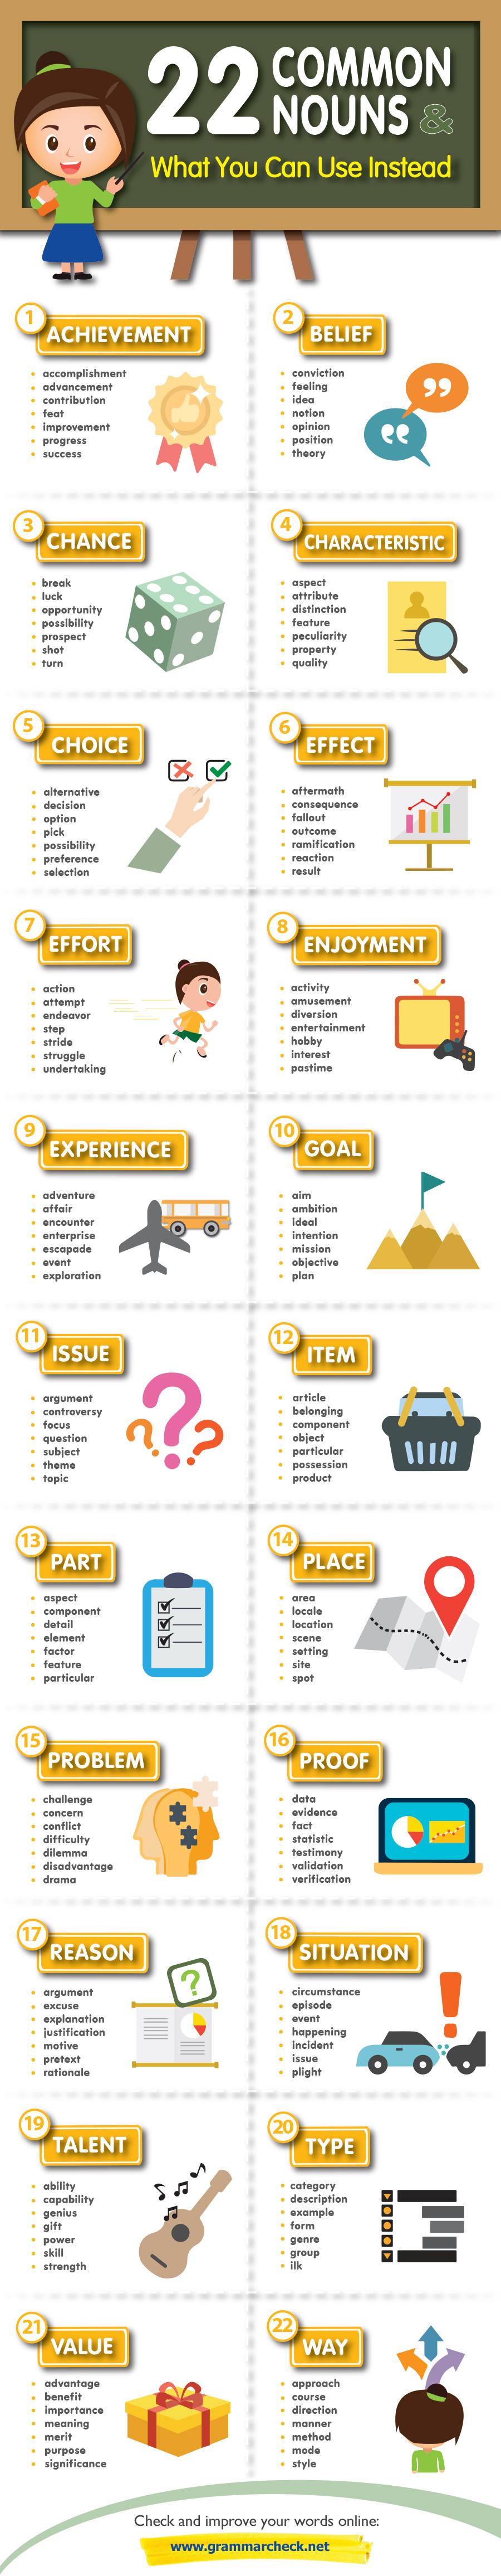 22 Common Nouns & What You Can Use Instead (Infographic)